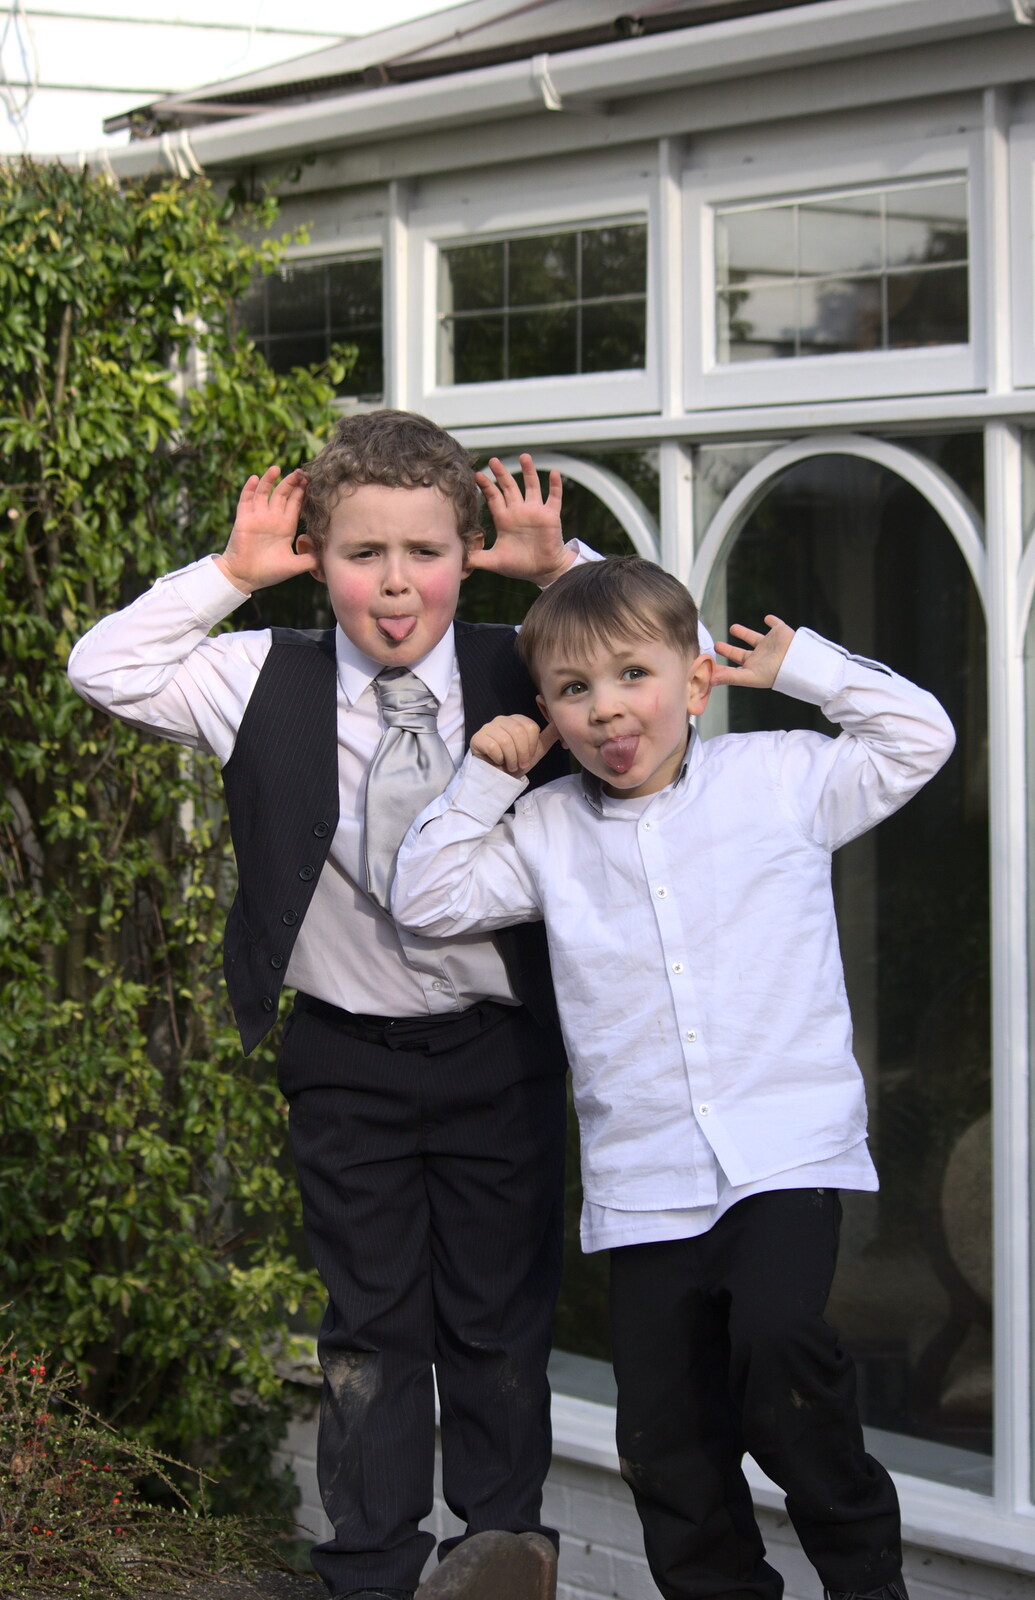 Lucas and a friend pull faces from John and Caroline's Wedding, Sheene Mill, Melbourne, Cambridgeshire - 8th March 2014